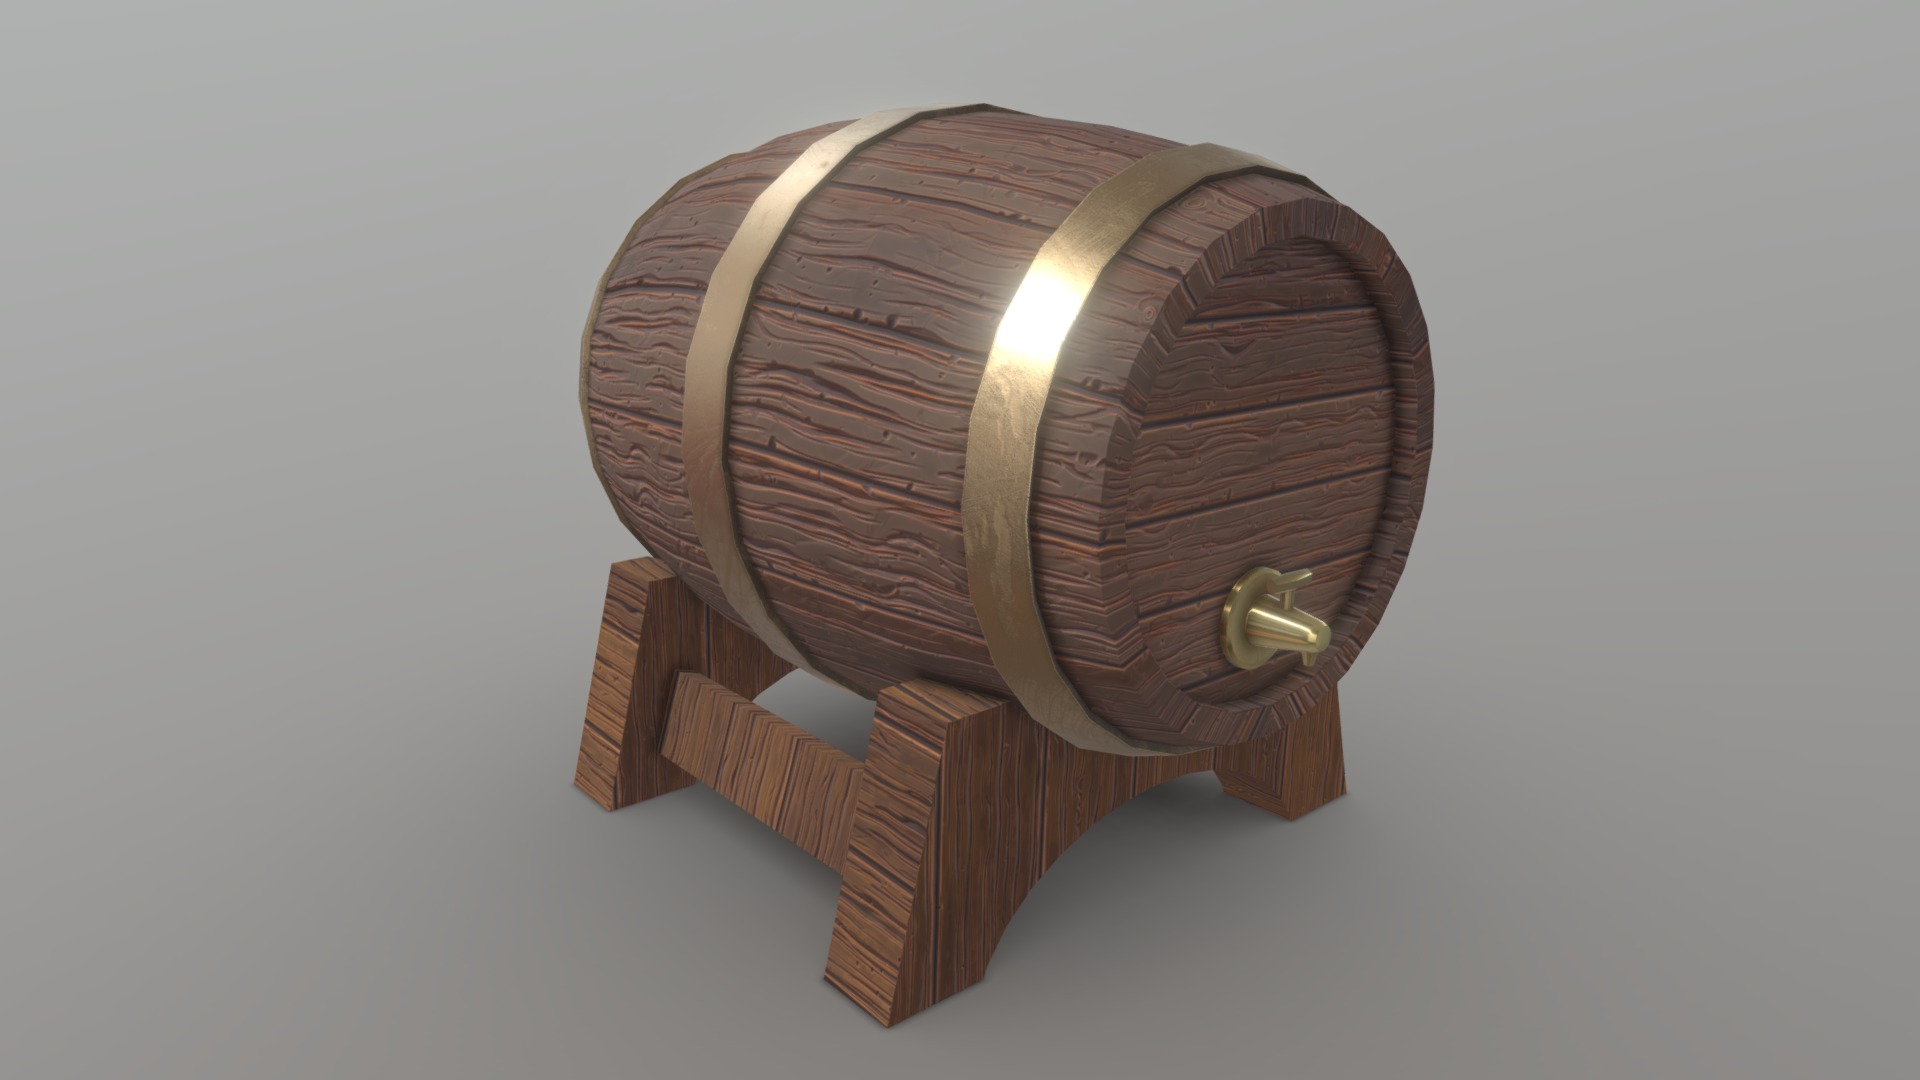 3D model Wooden Keg - This is a 3D model of the Wooden Keg. The 3D model is about a wooden model of a spiral staircase.